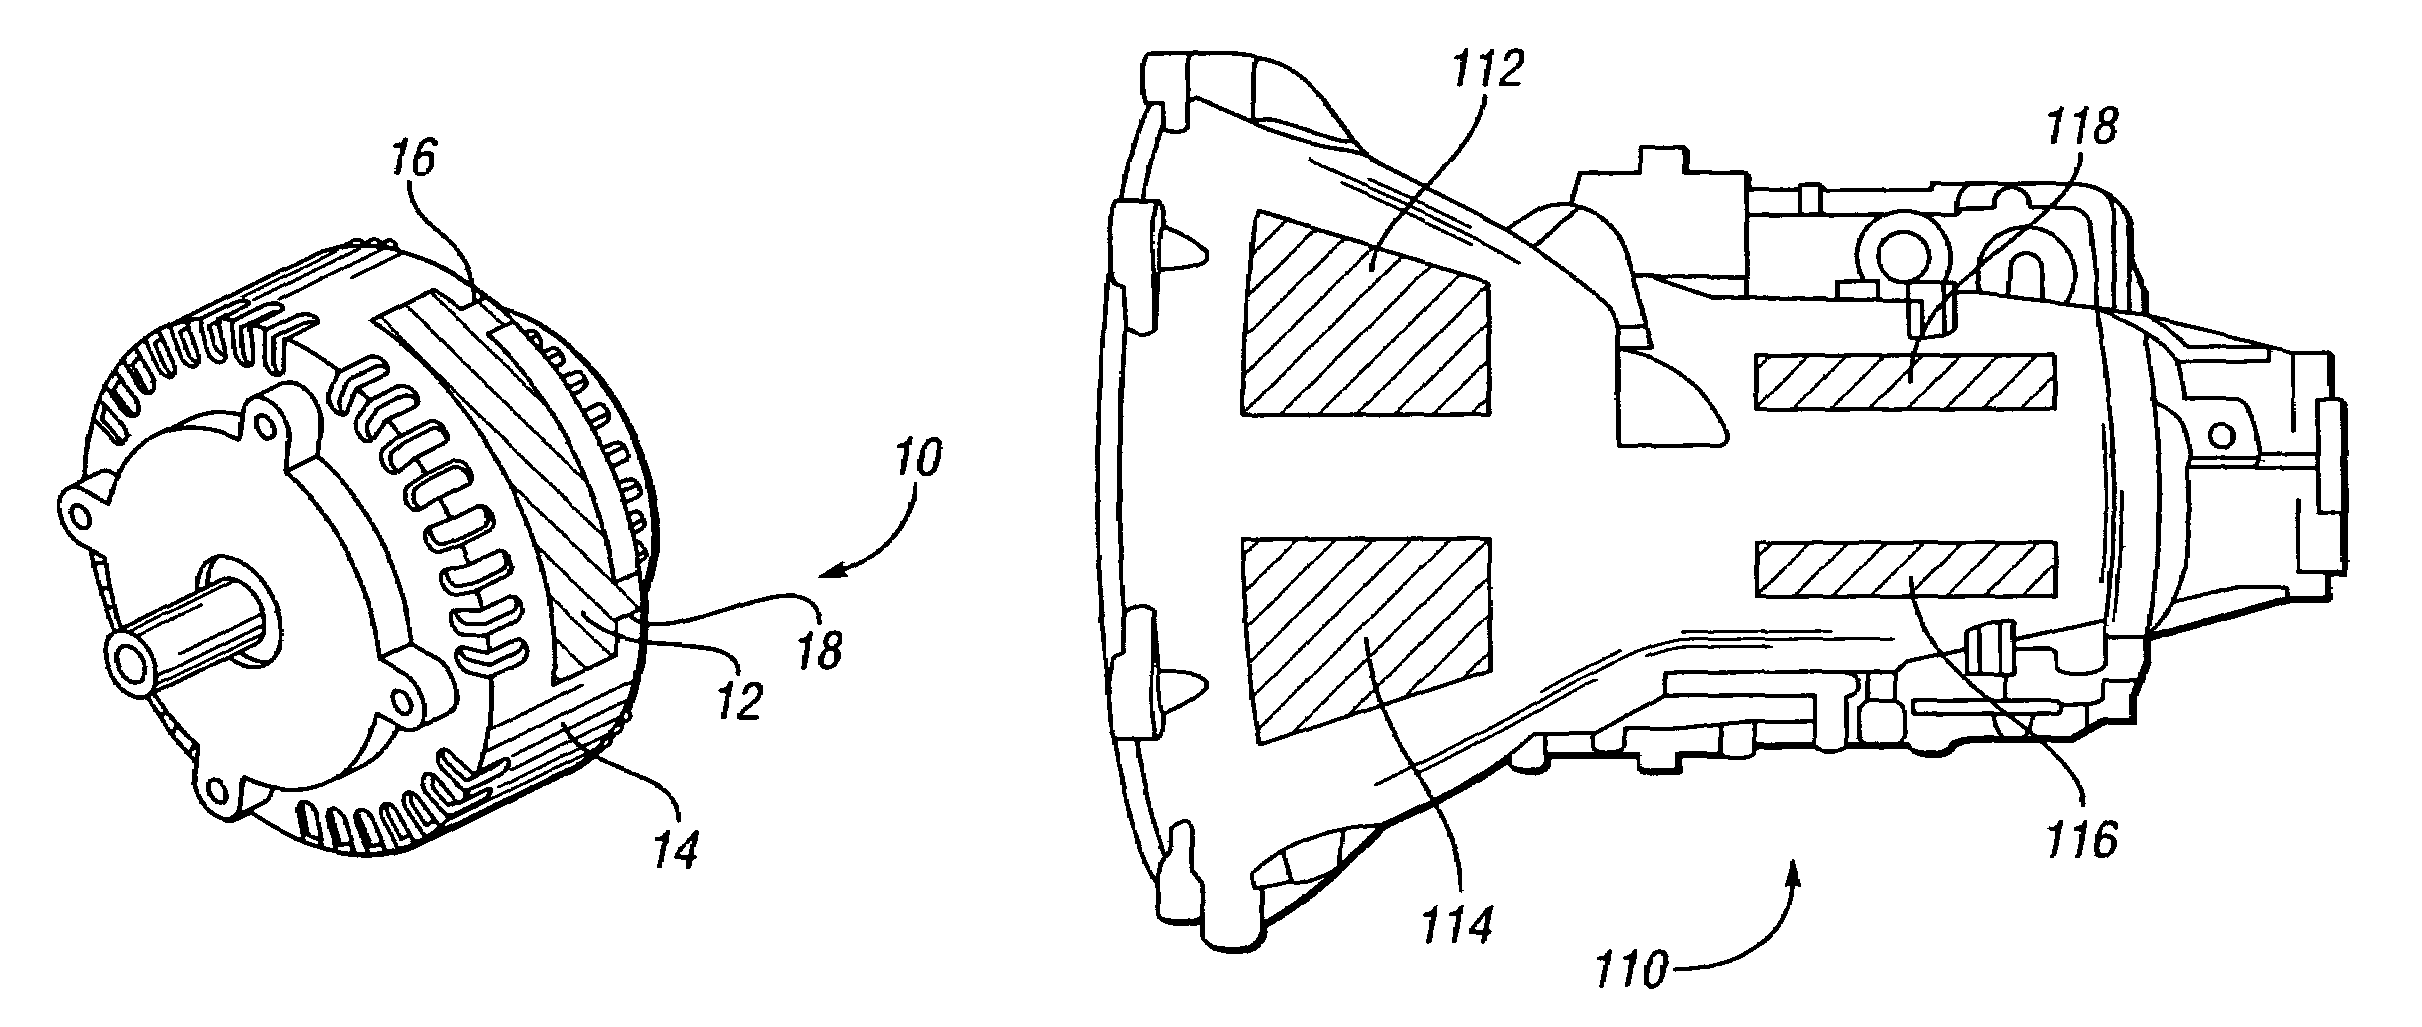 Method of casting components with inserts for noise reduction